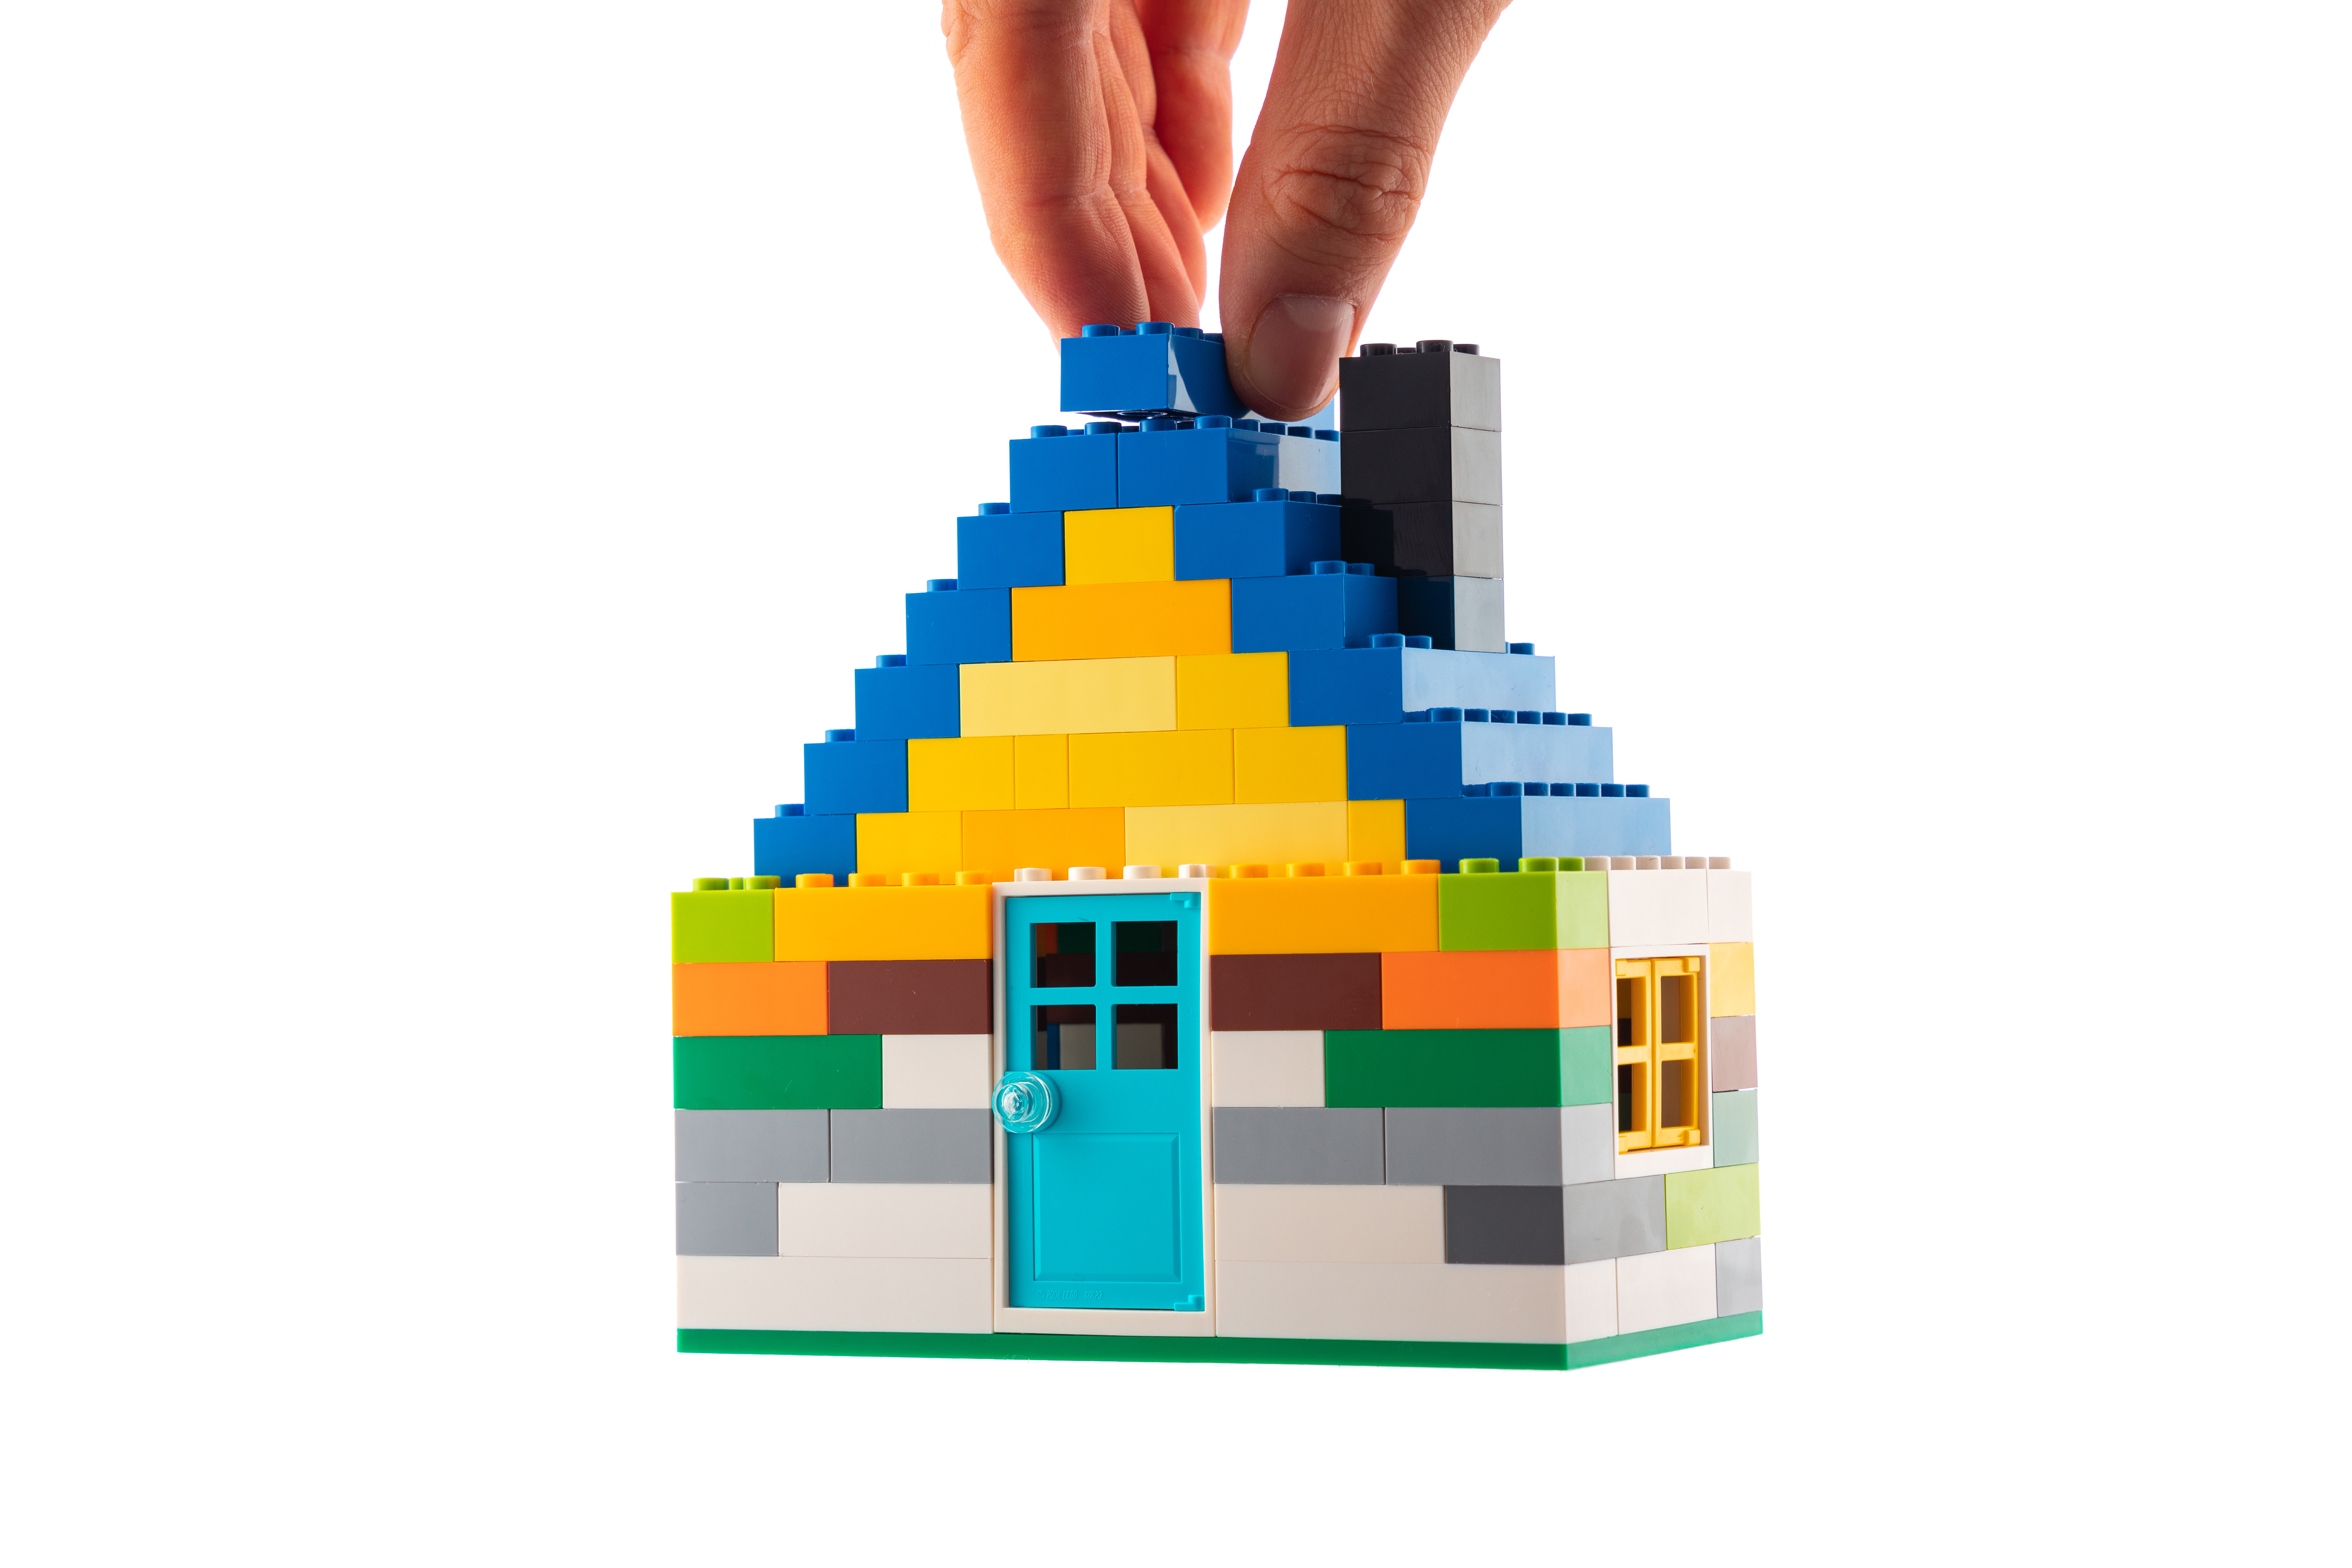 House made of classic building blocks, white studio background.